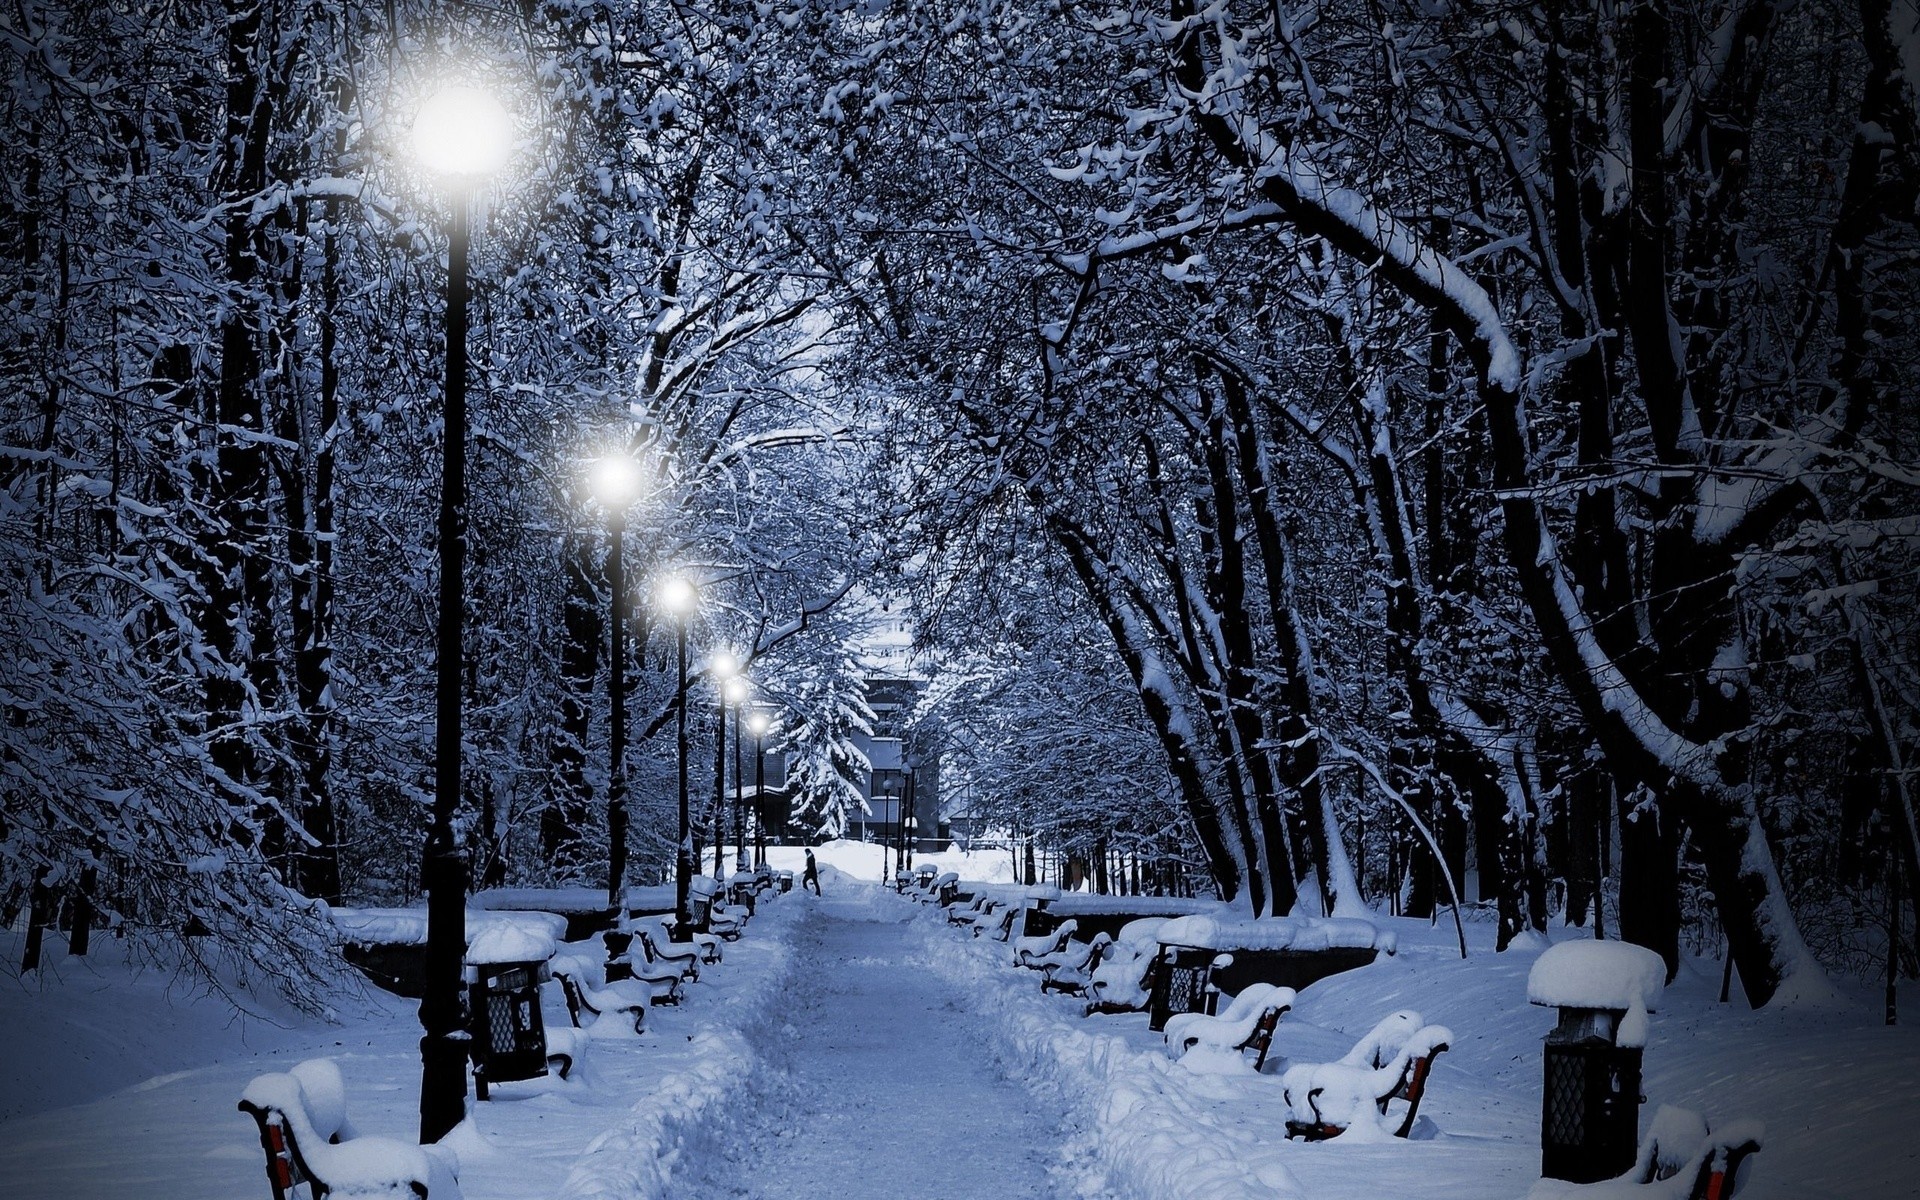 Landscapes nature winter snow snowflakes snowing trees park white night lights christmas wallpaper 24142 WallpaperUP